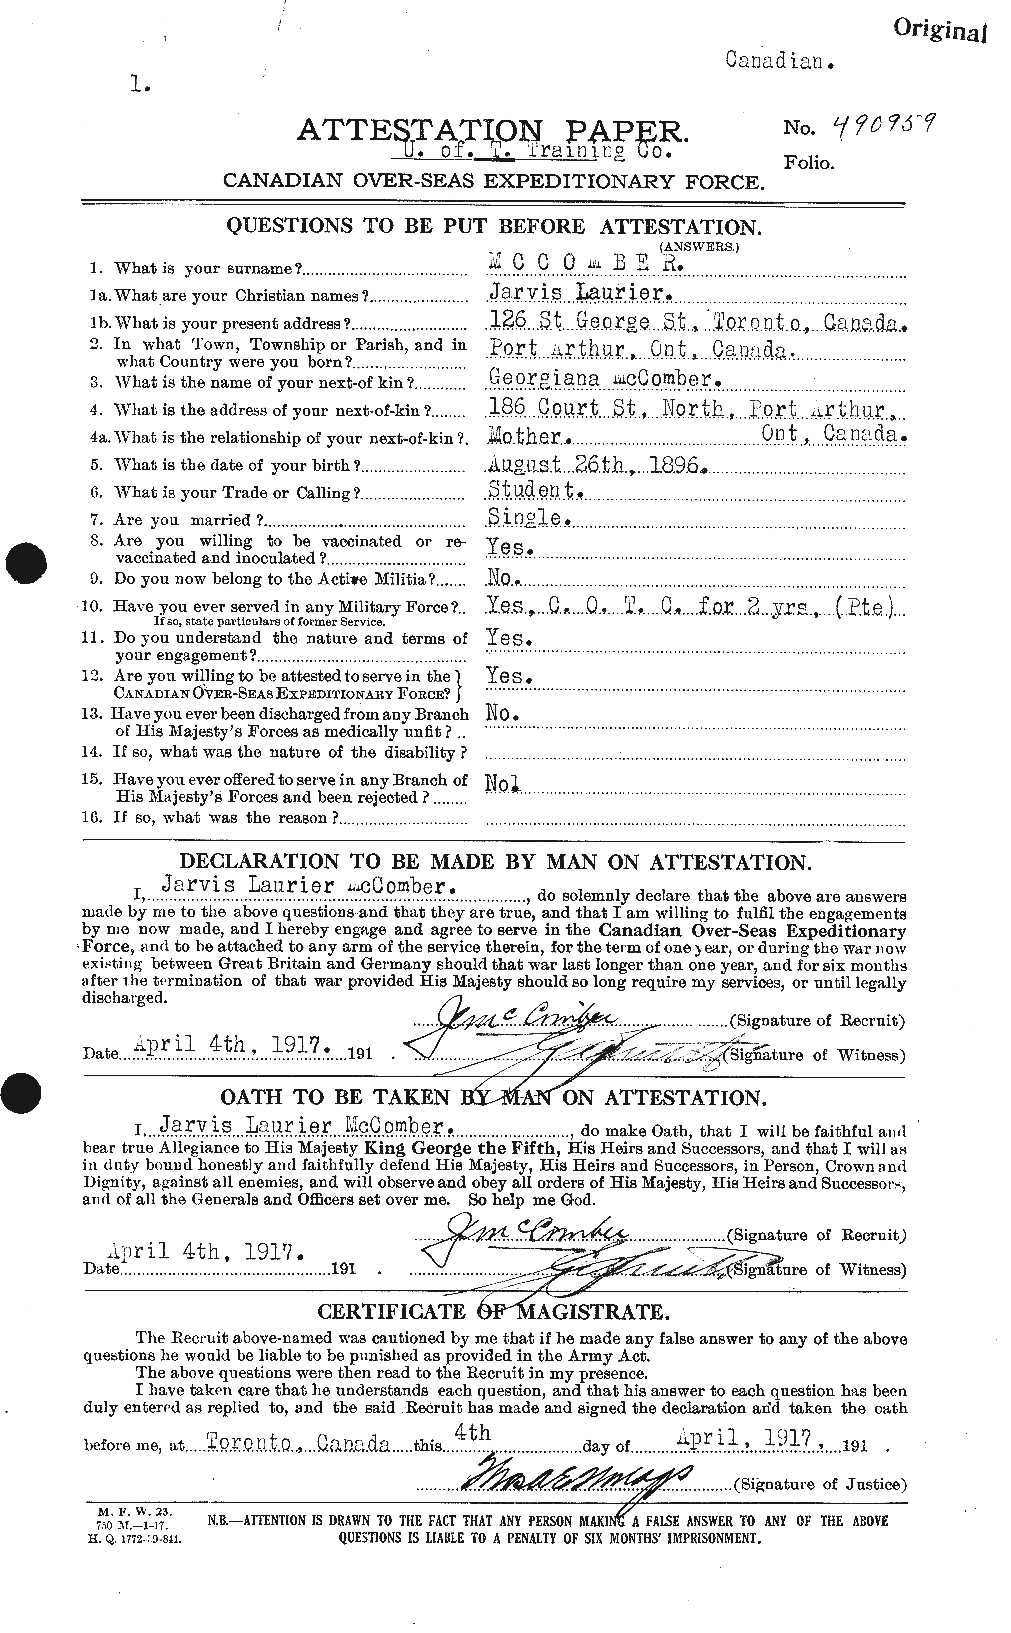 Personnel Records of the First World War - CEF 133098a